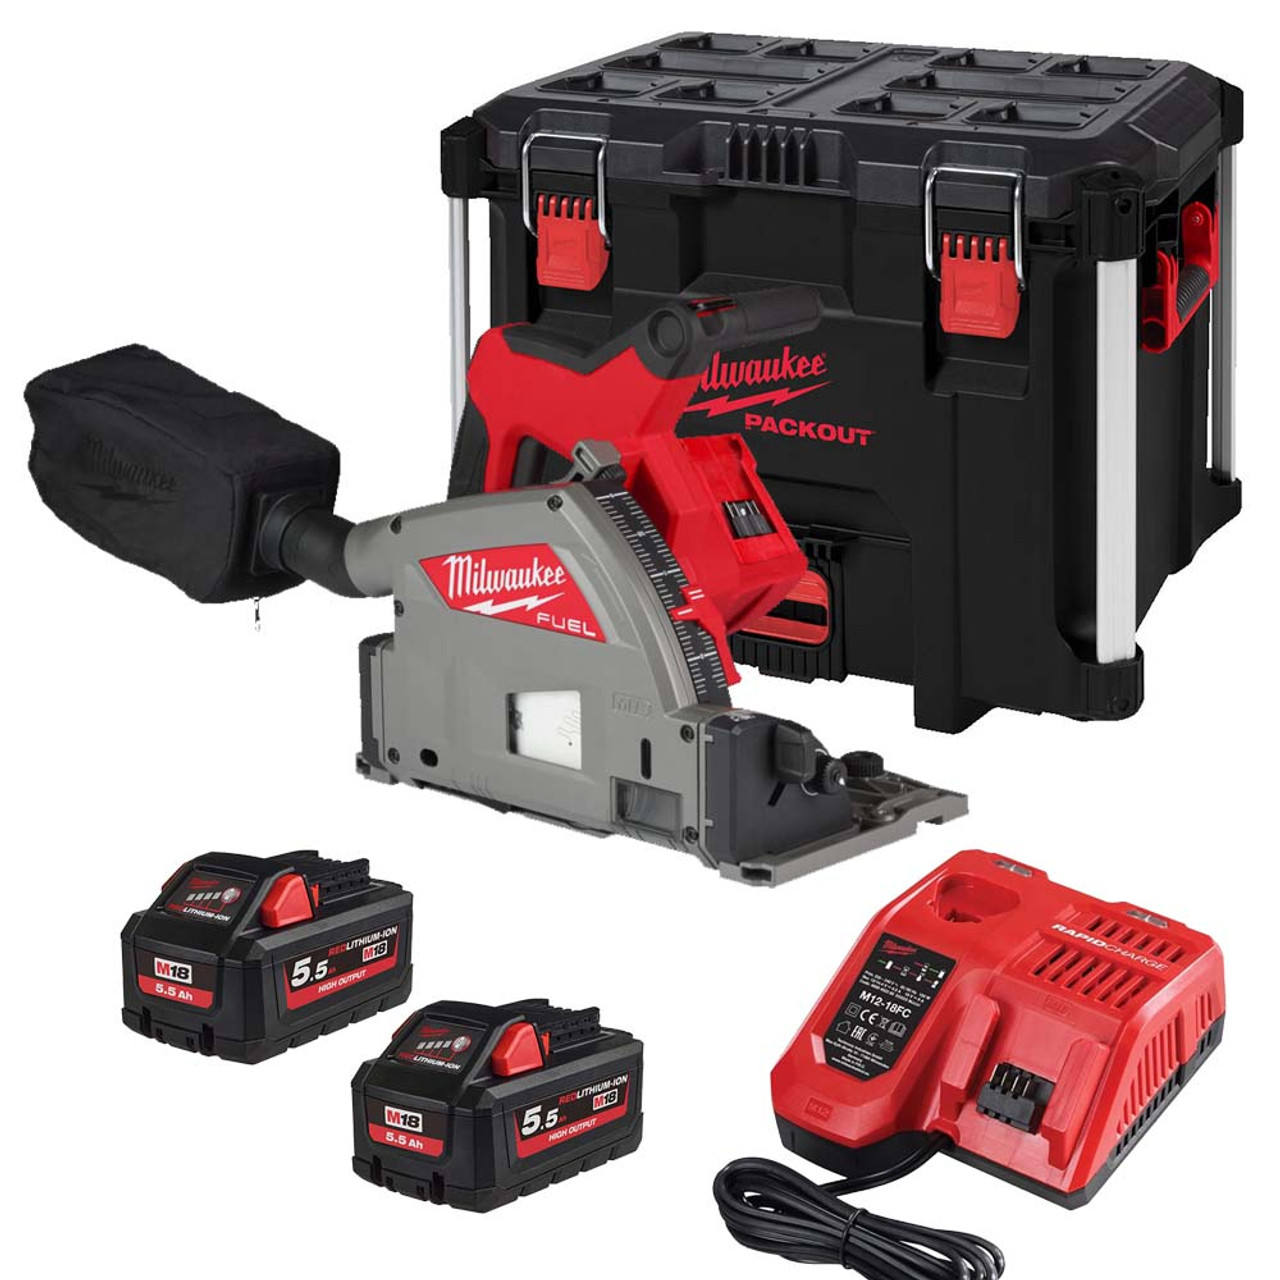 Milwaukee 18v Fuel Brushless 165mm Plunge Saw - M18FPS55 - 5.5ah Pack & Packout